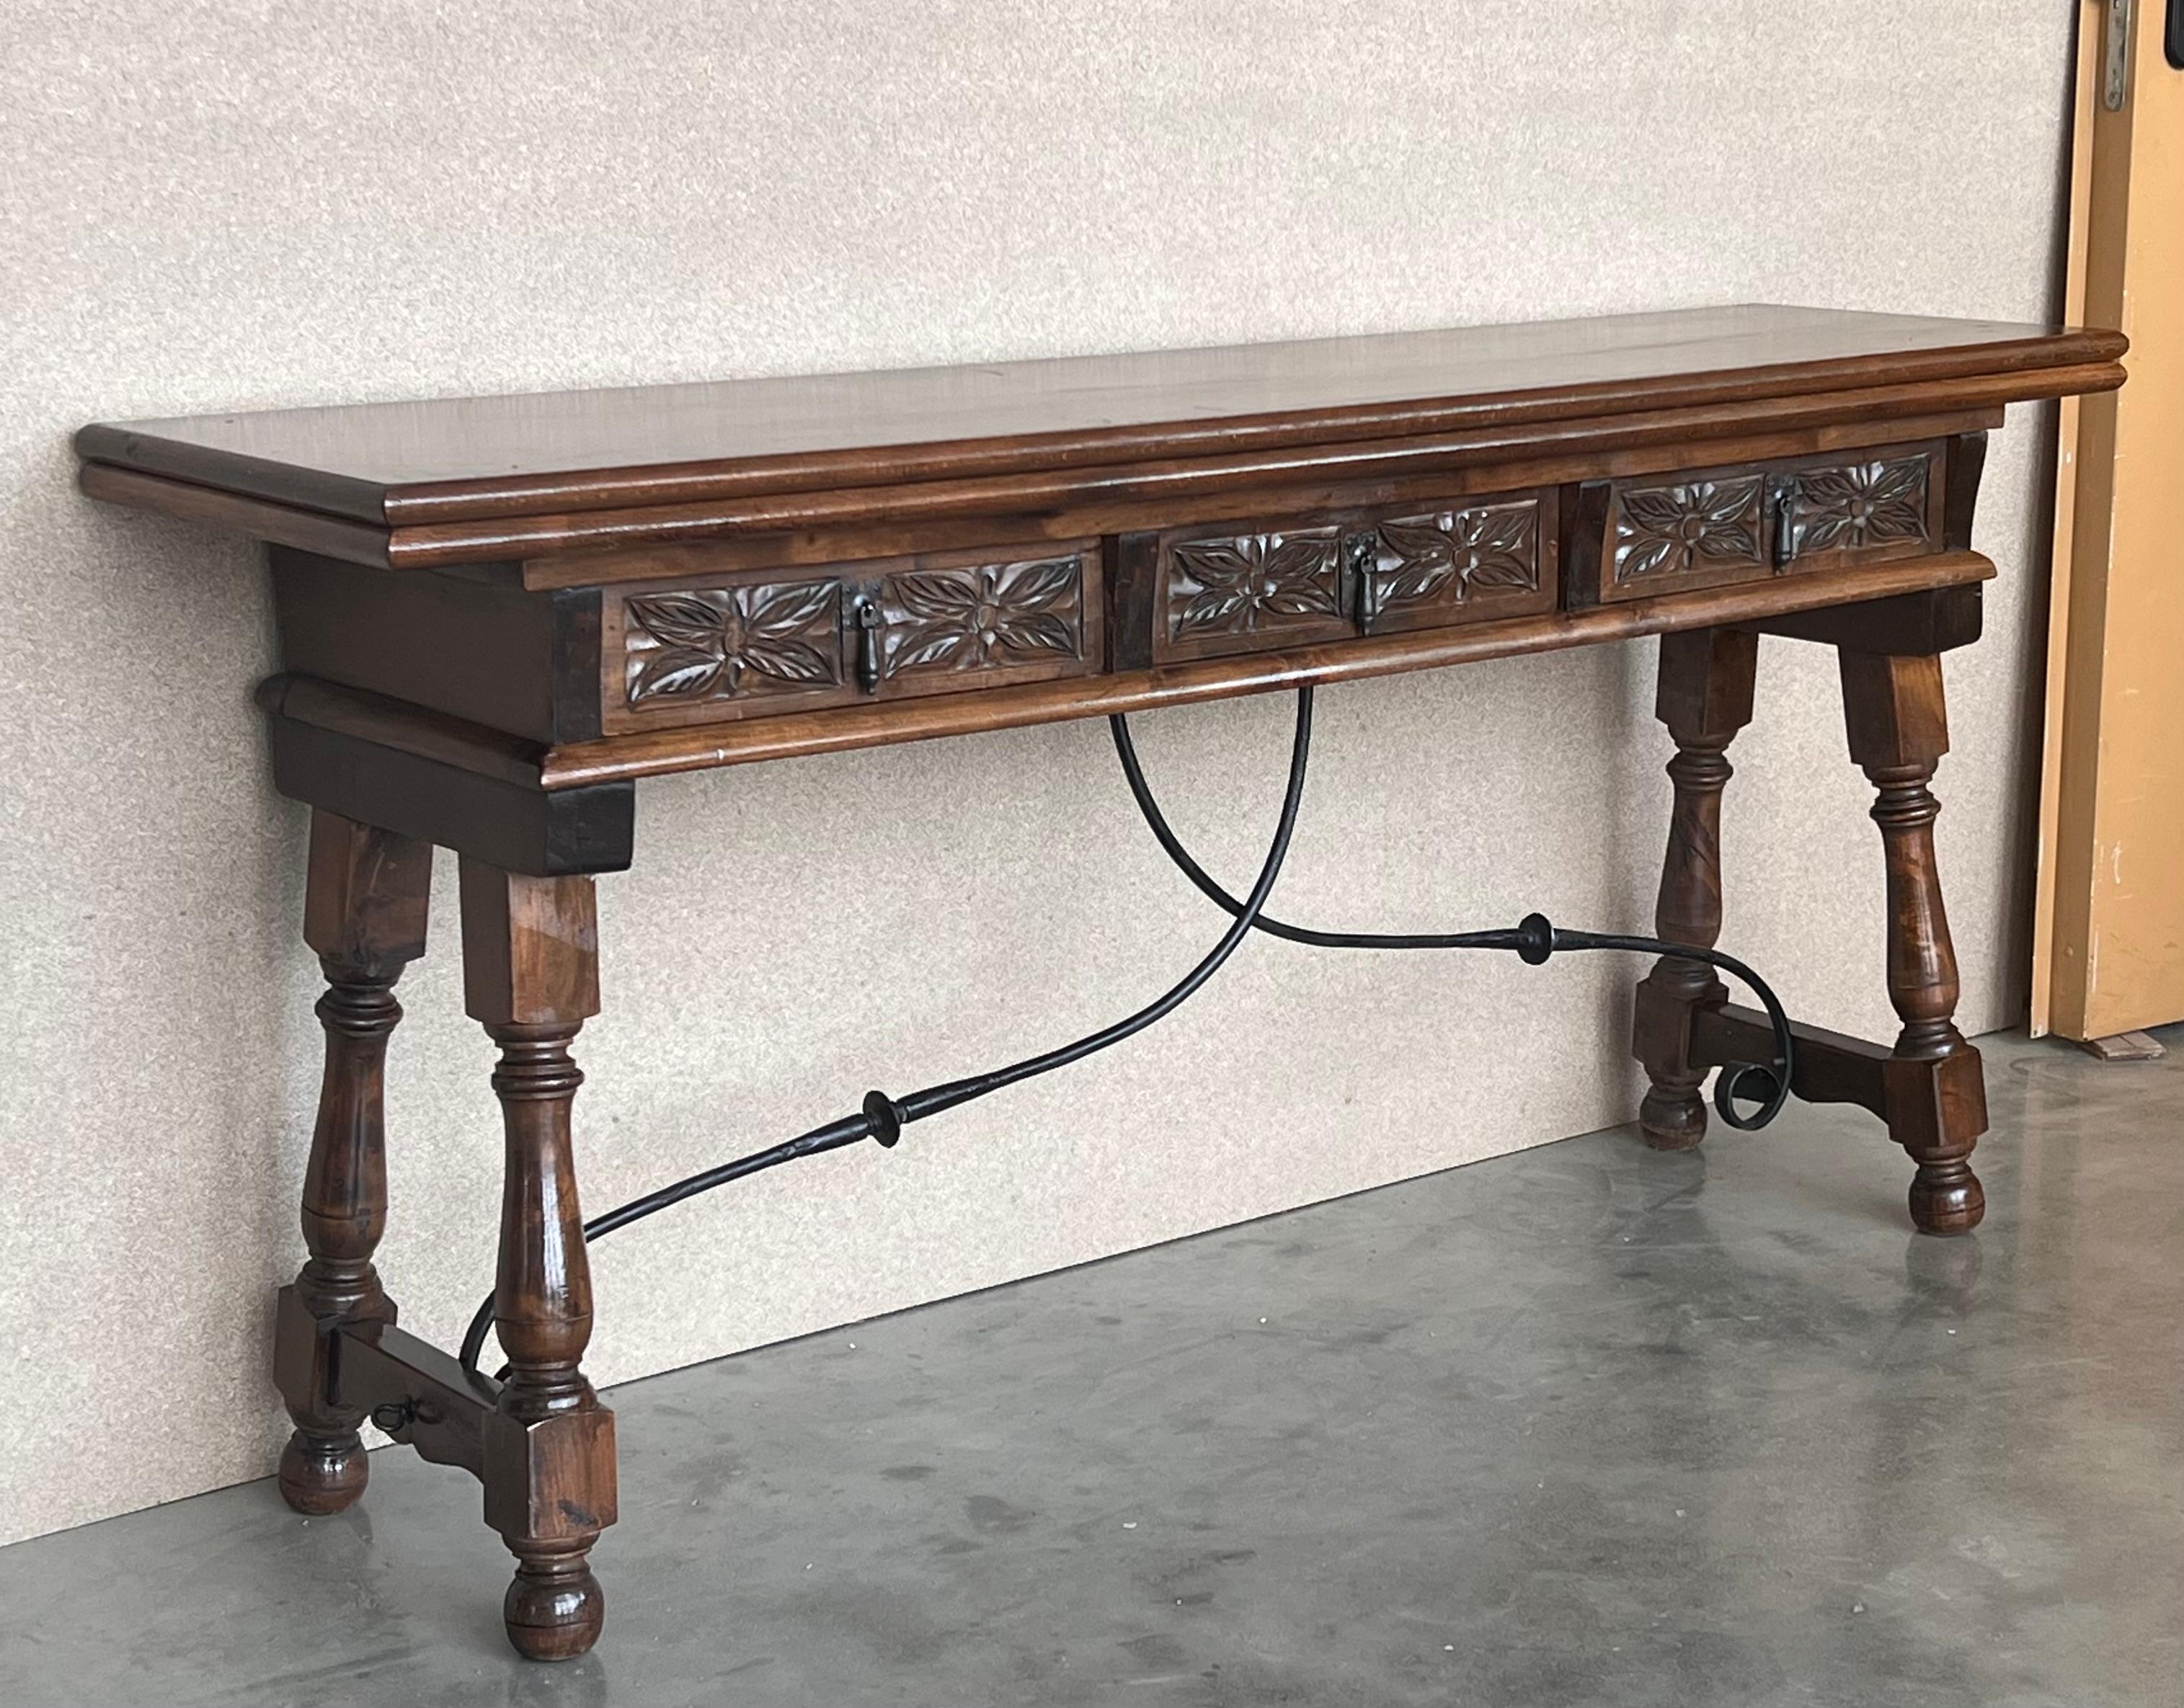 Early 20th century Spanish console fold out table with iron stretcher & three drawers.
A beautiful early 20th century Spanish console fold out farm table.
Works as both a dining table and console.
This Console is perfect to decorate our entrance